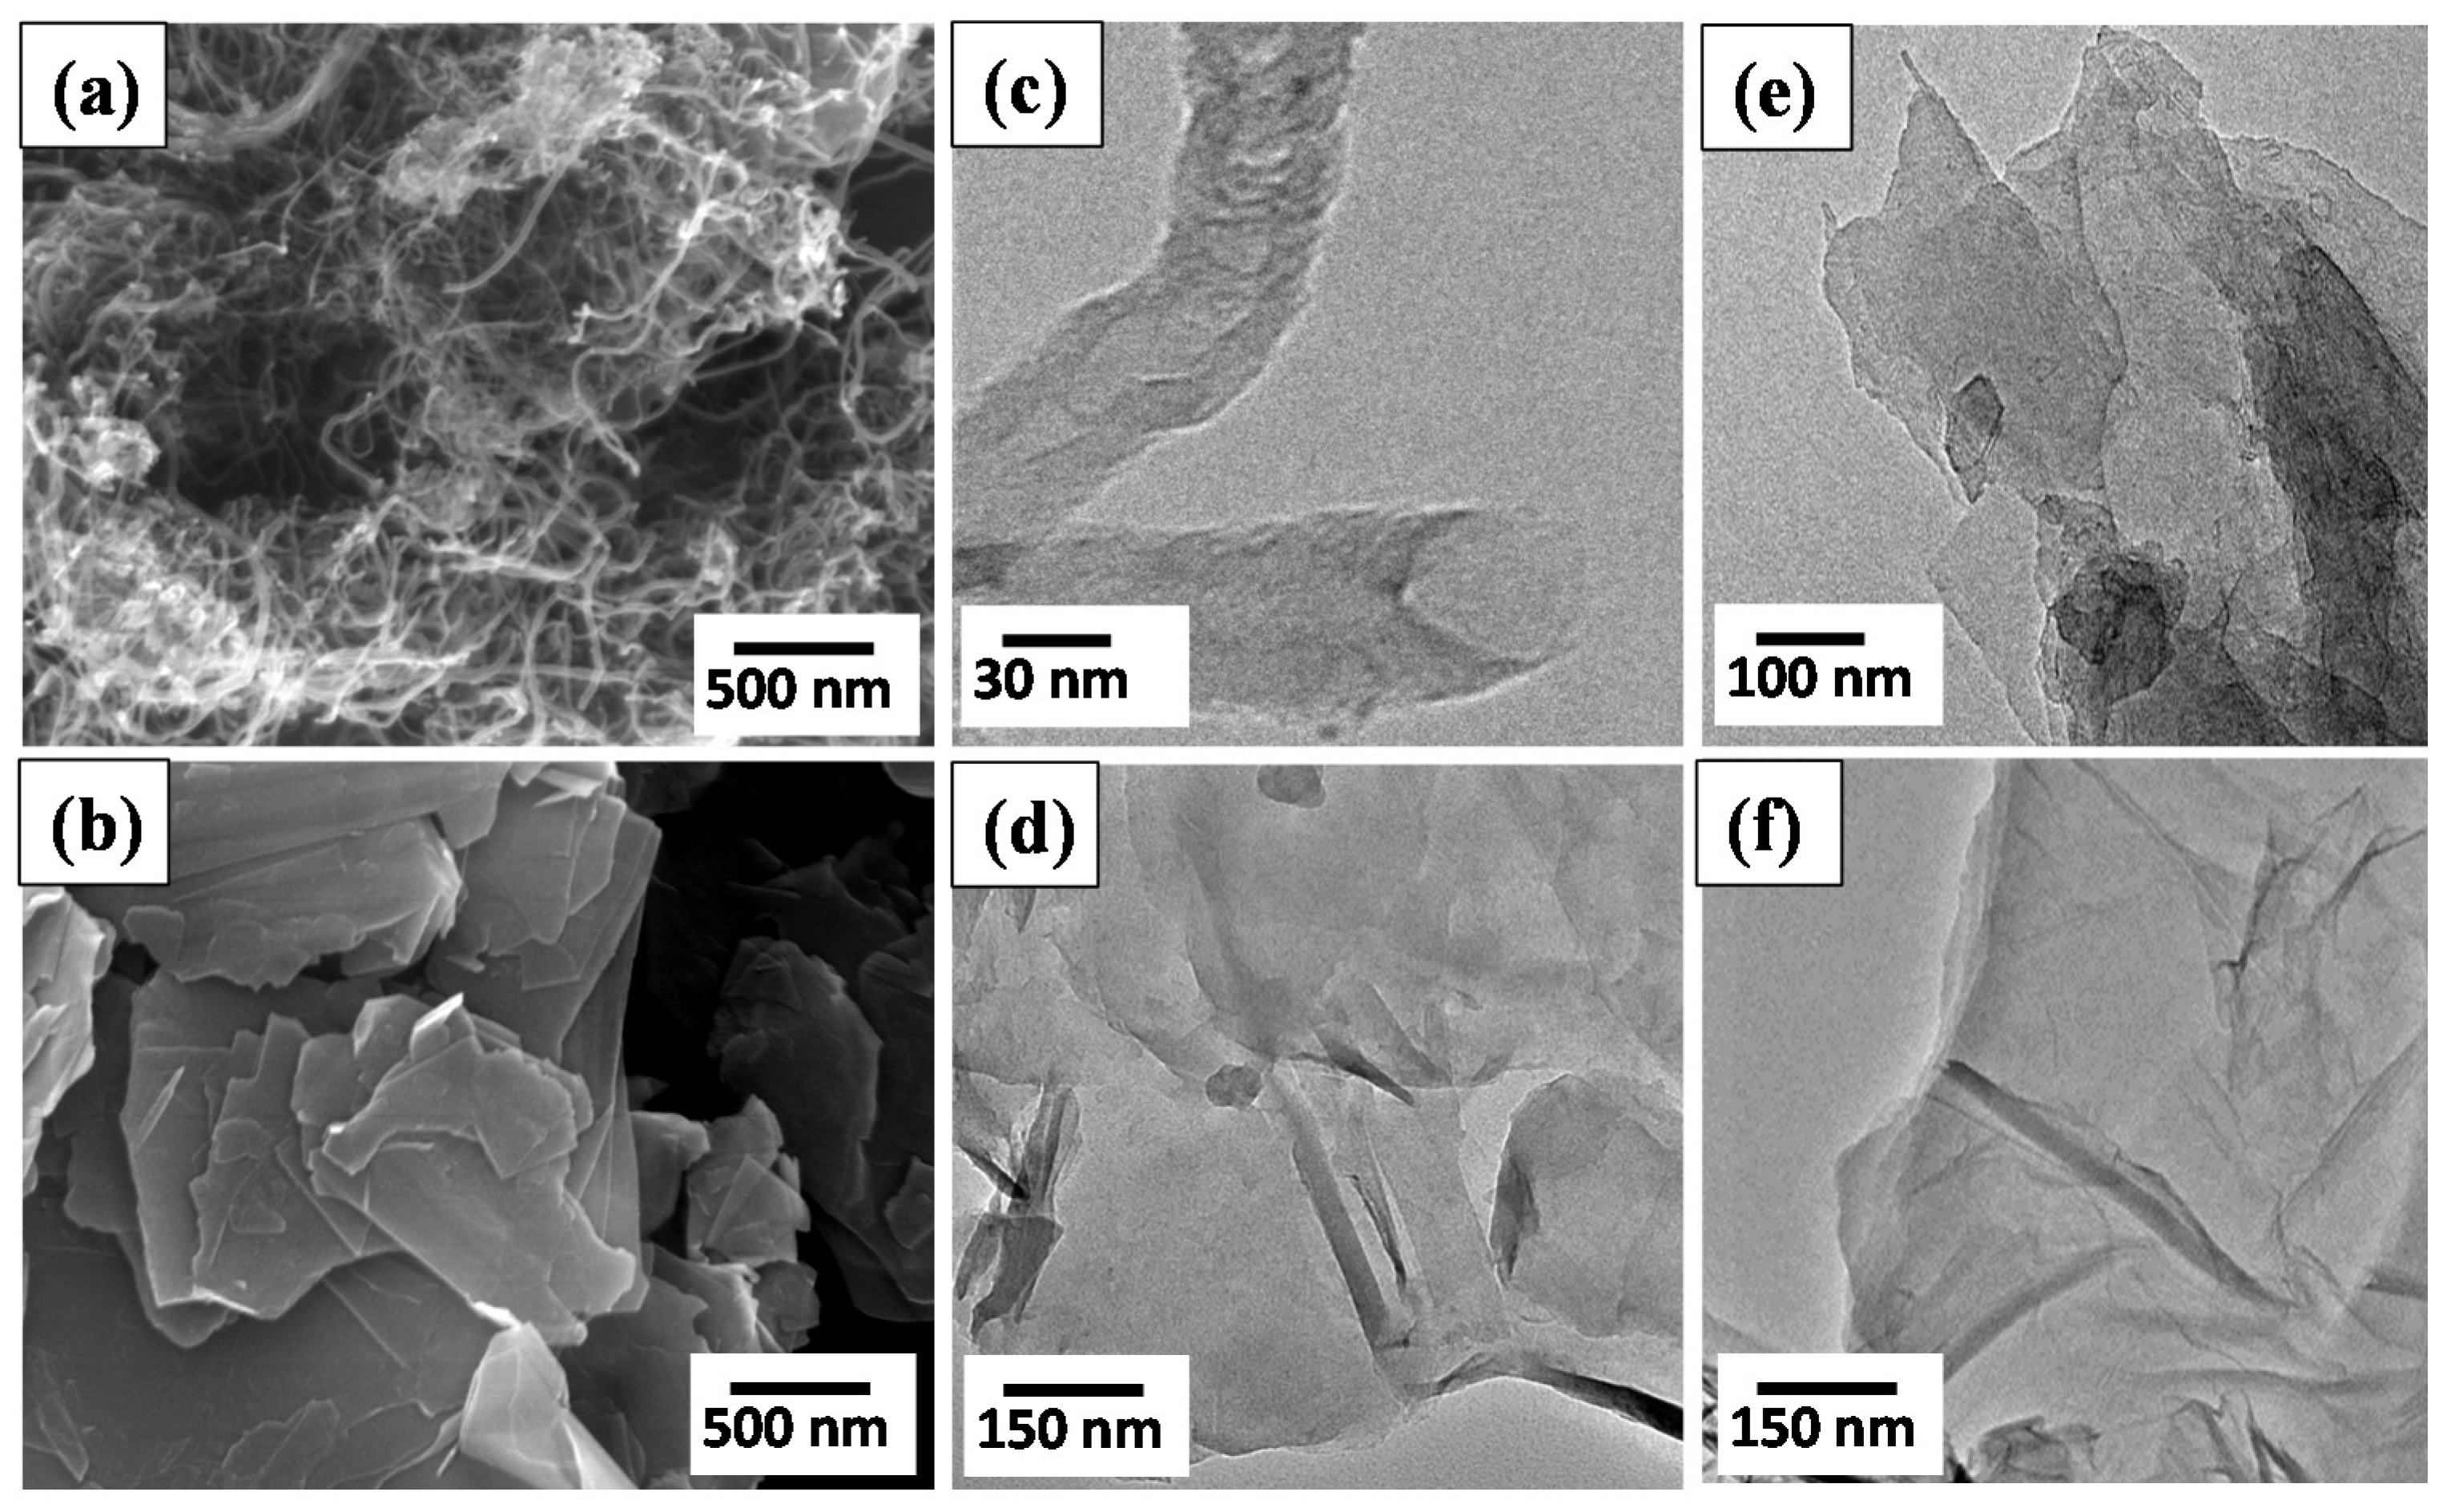 Coatings | Free Full-Text | Thermal Transport on Graphene-Based Thin Films Prepared by Chemical Exfoliations from Carbon Nanotubes and Graphite Powders